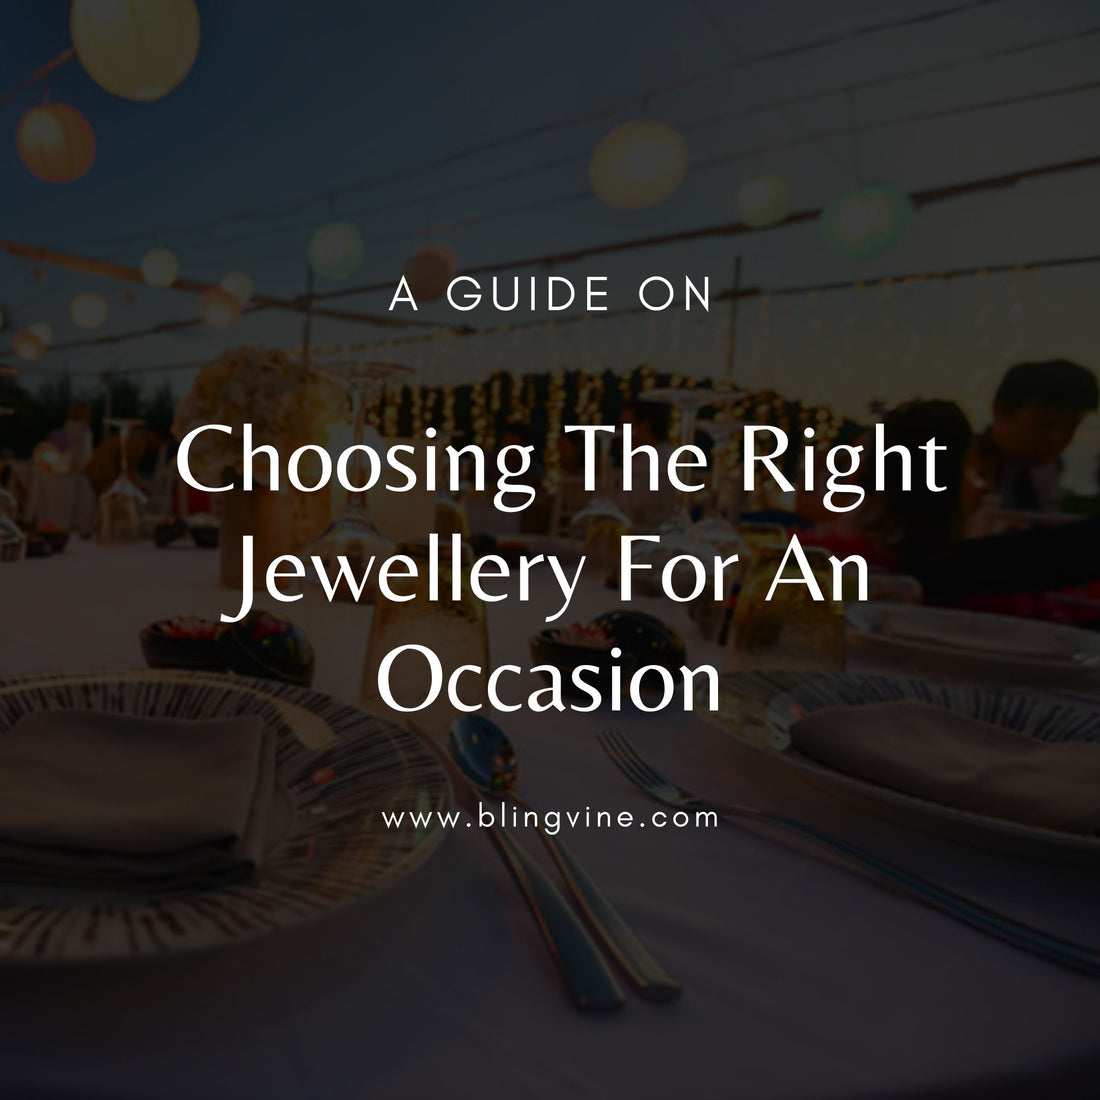 8 Tips On How To Choose The Right Jewellery For An Occasion